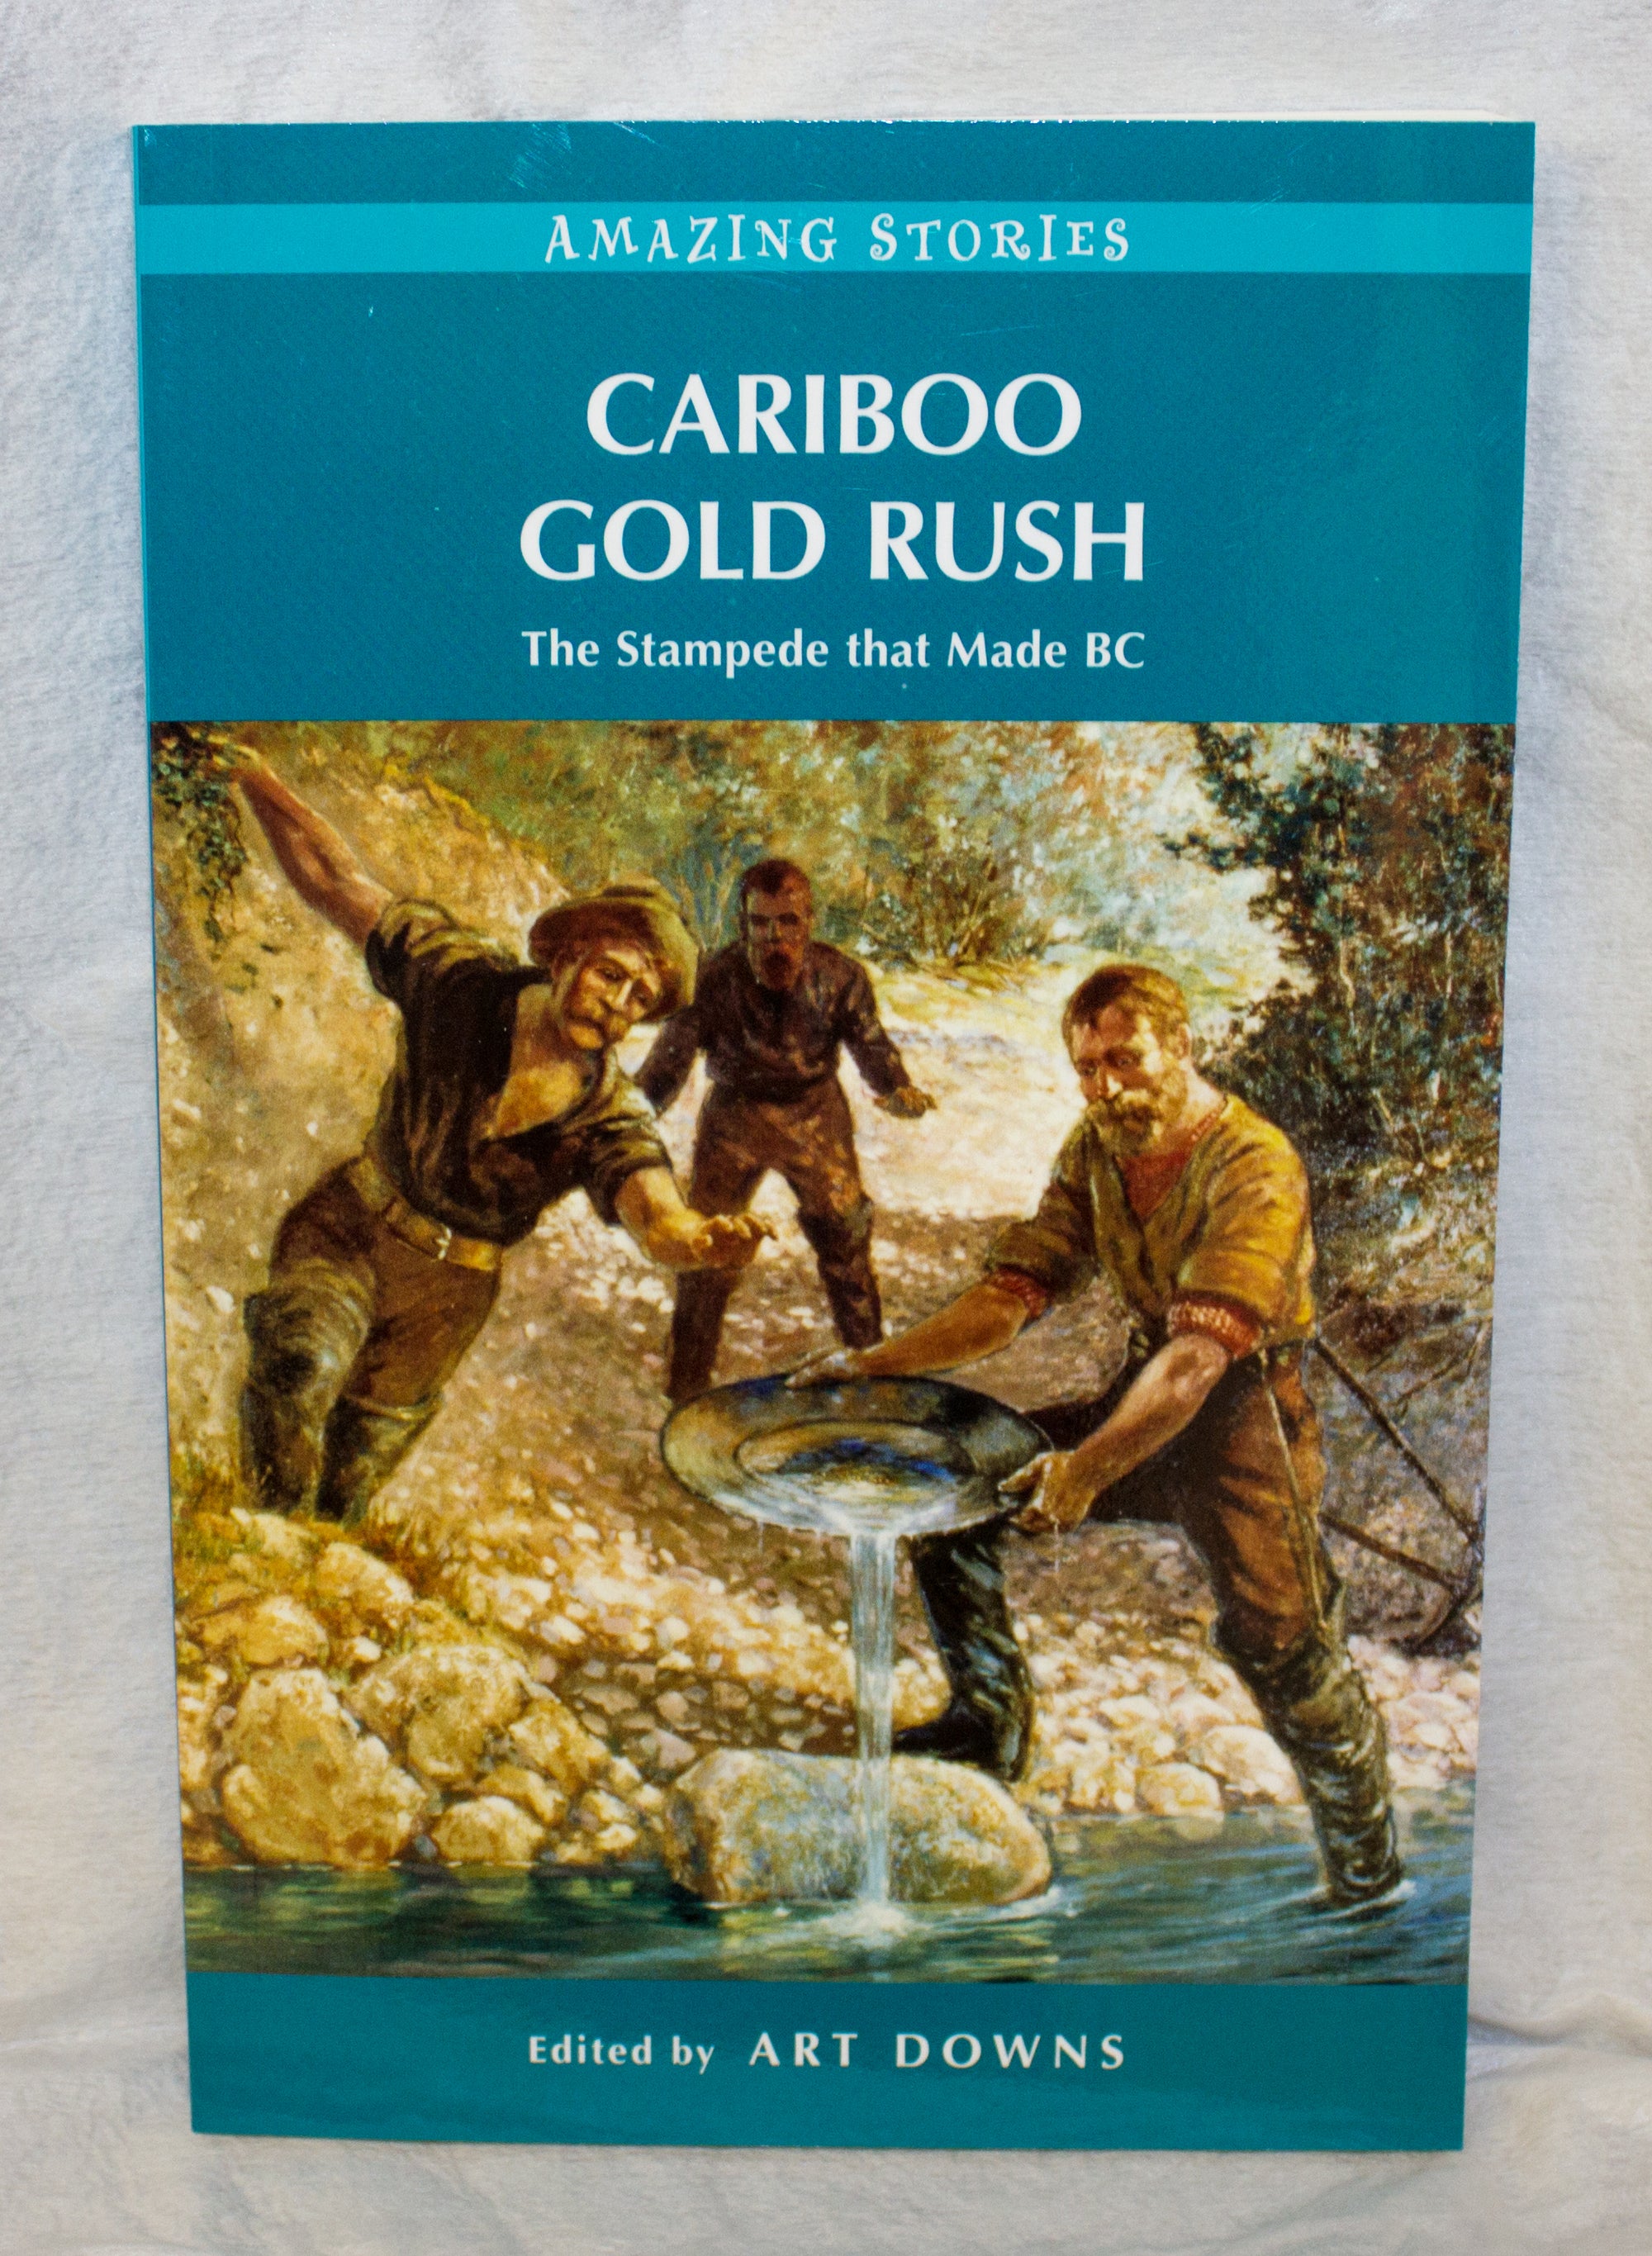 The ReDiscoverers - Gold Rush Supplies Inc.